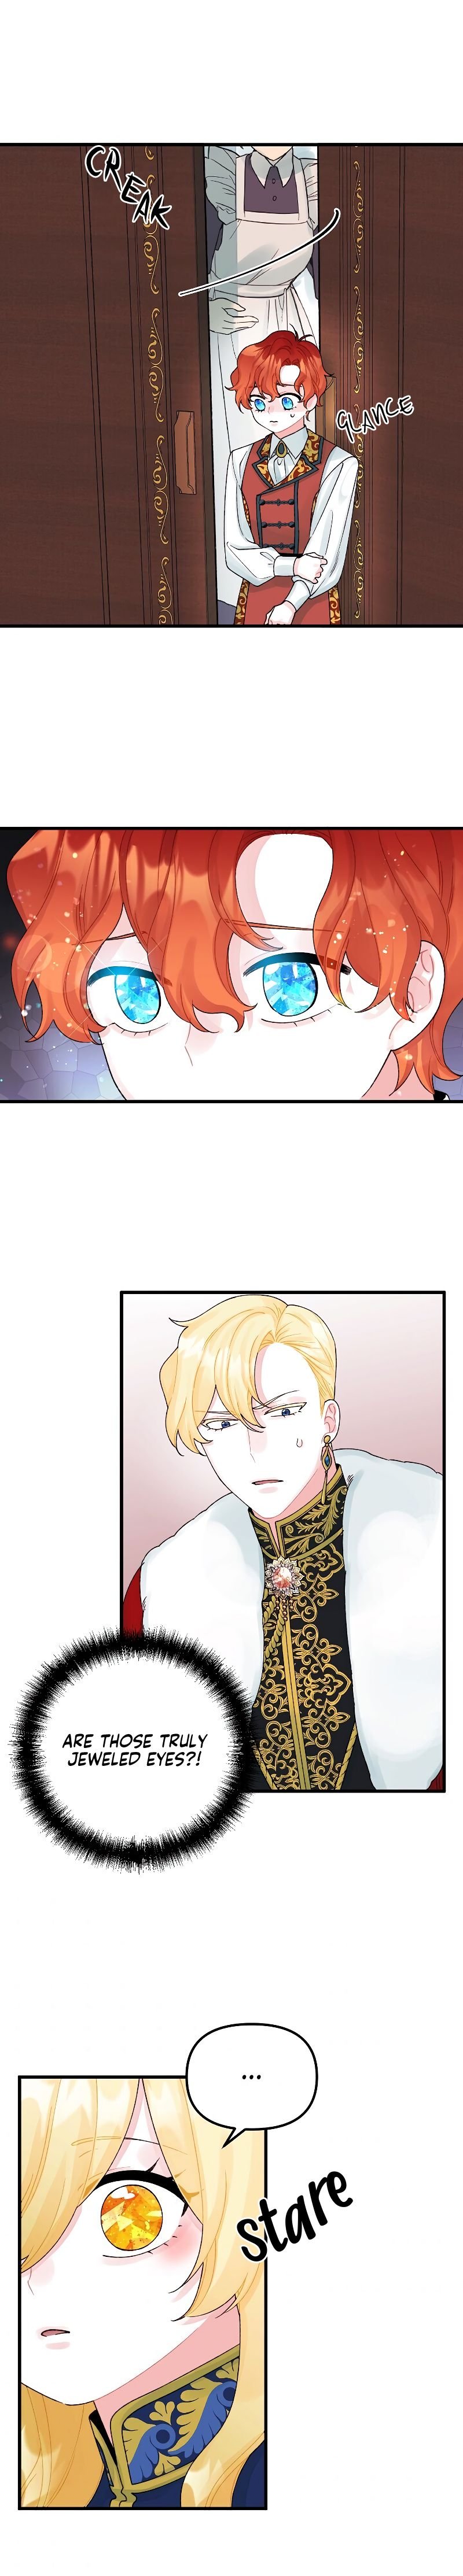 the-princess-in-the-dumpster-chap-37-9